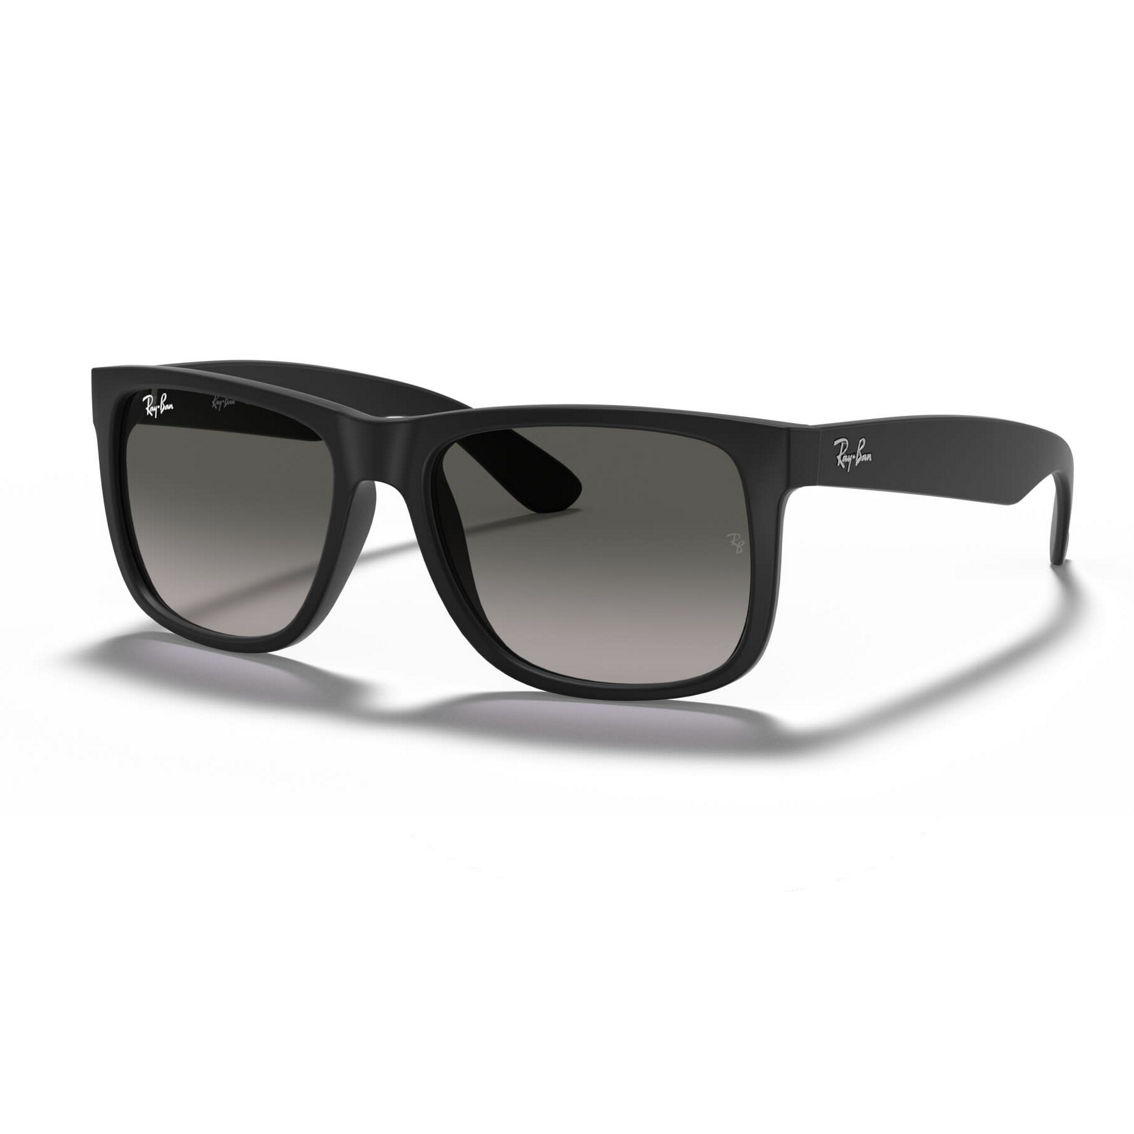 Ray-Ban RB4165 Justin Classic - Image 1 of 5